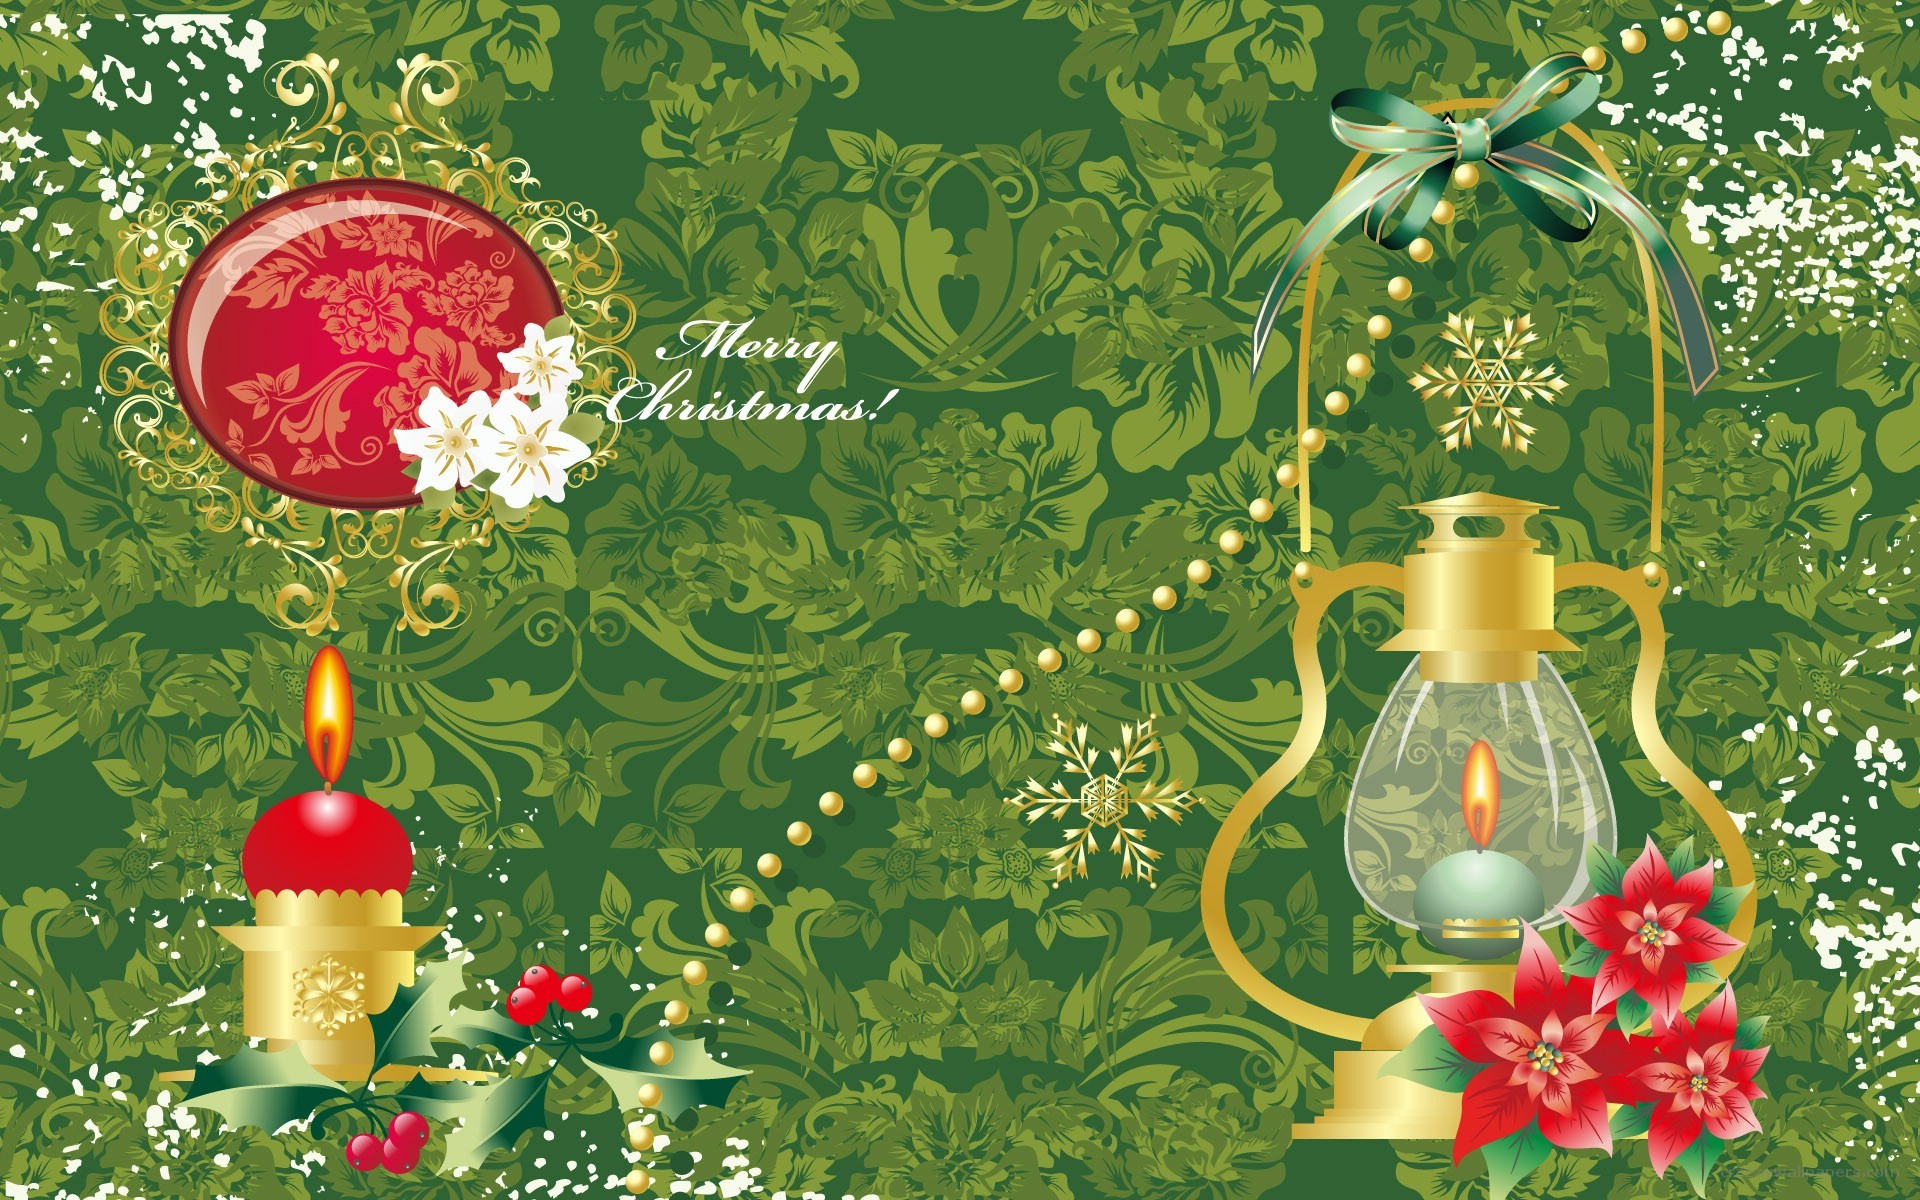 35 Christmas Wallpapers for Decorating your Desktop | Webdesign Core